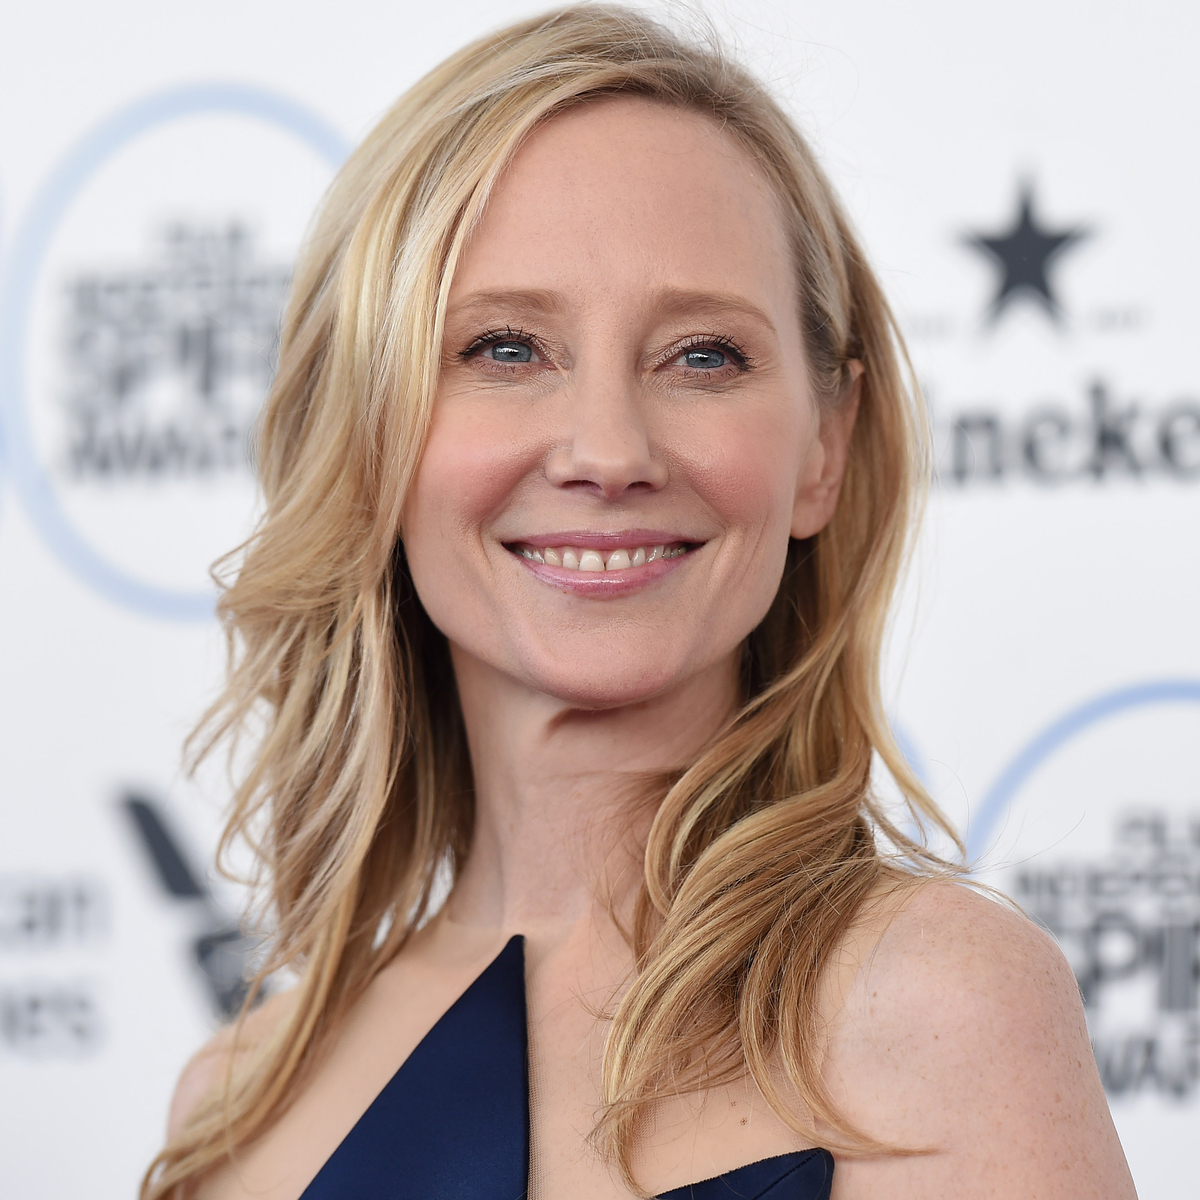 The Complicated Aftermath of Anne Heche's Death